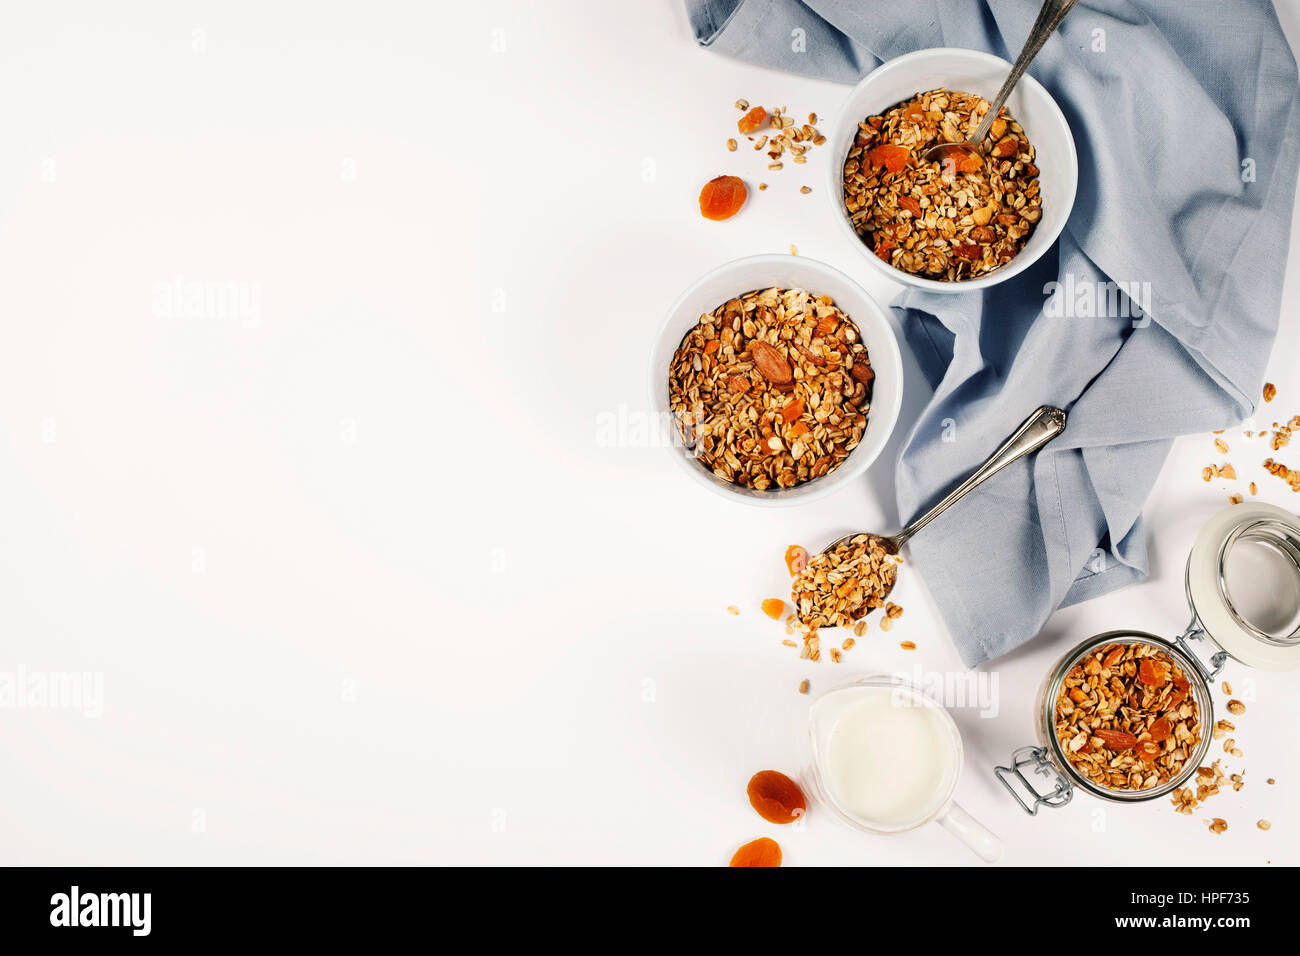 Homemade granola (with dried fruit and nuts) on white background Stock Photo